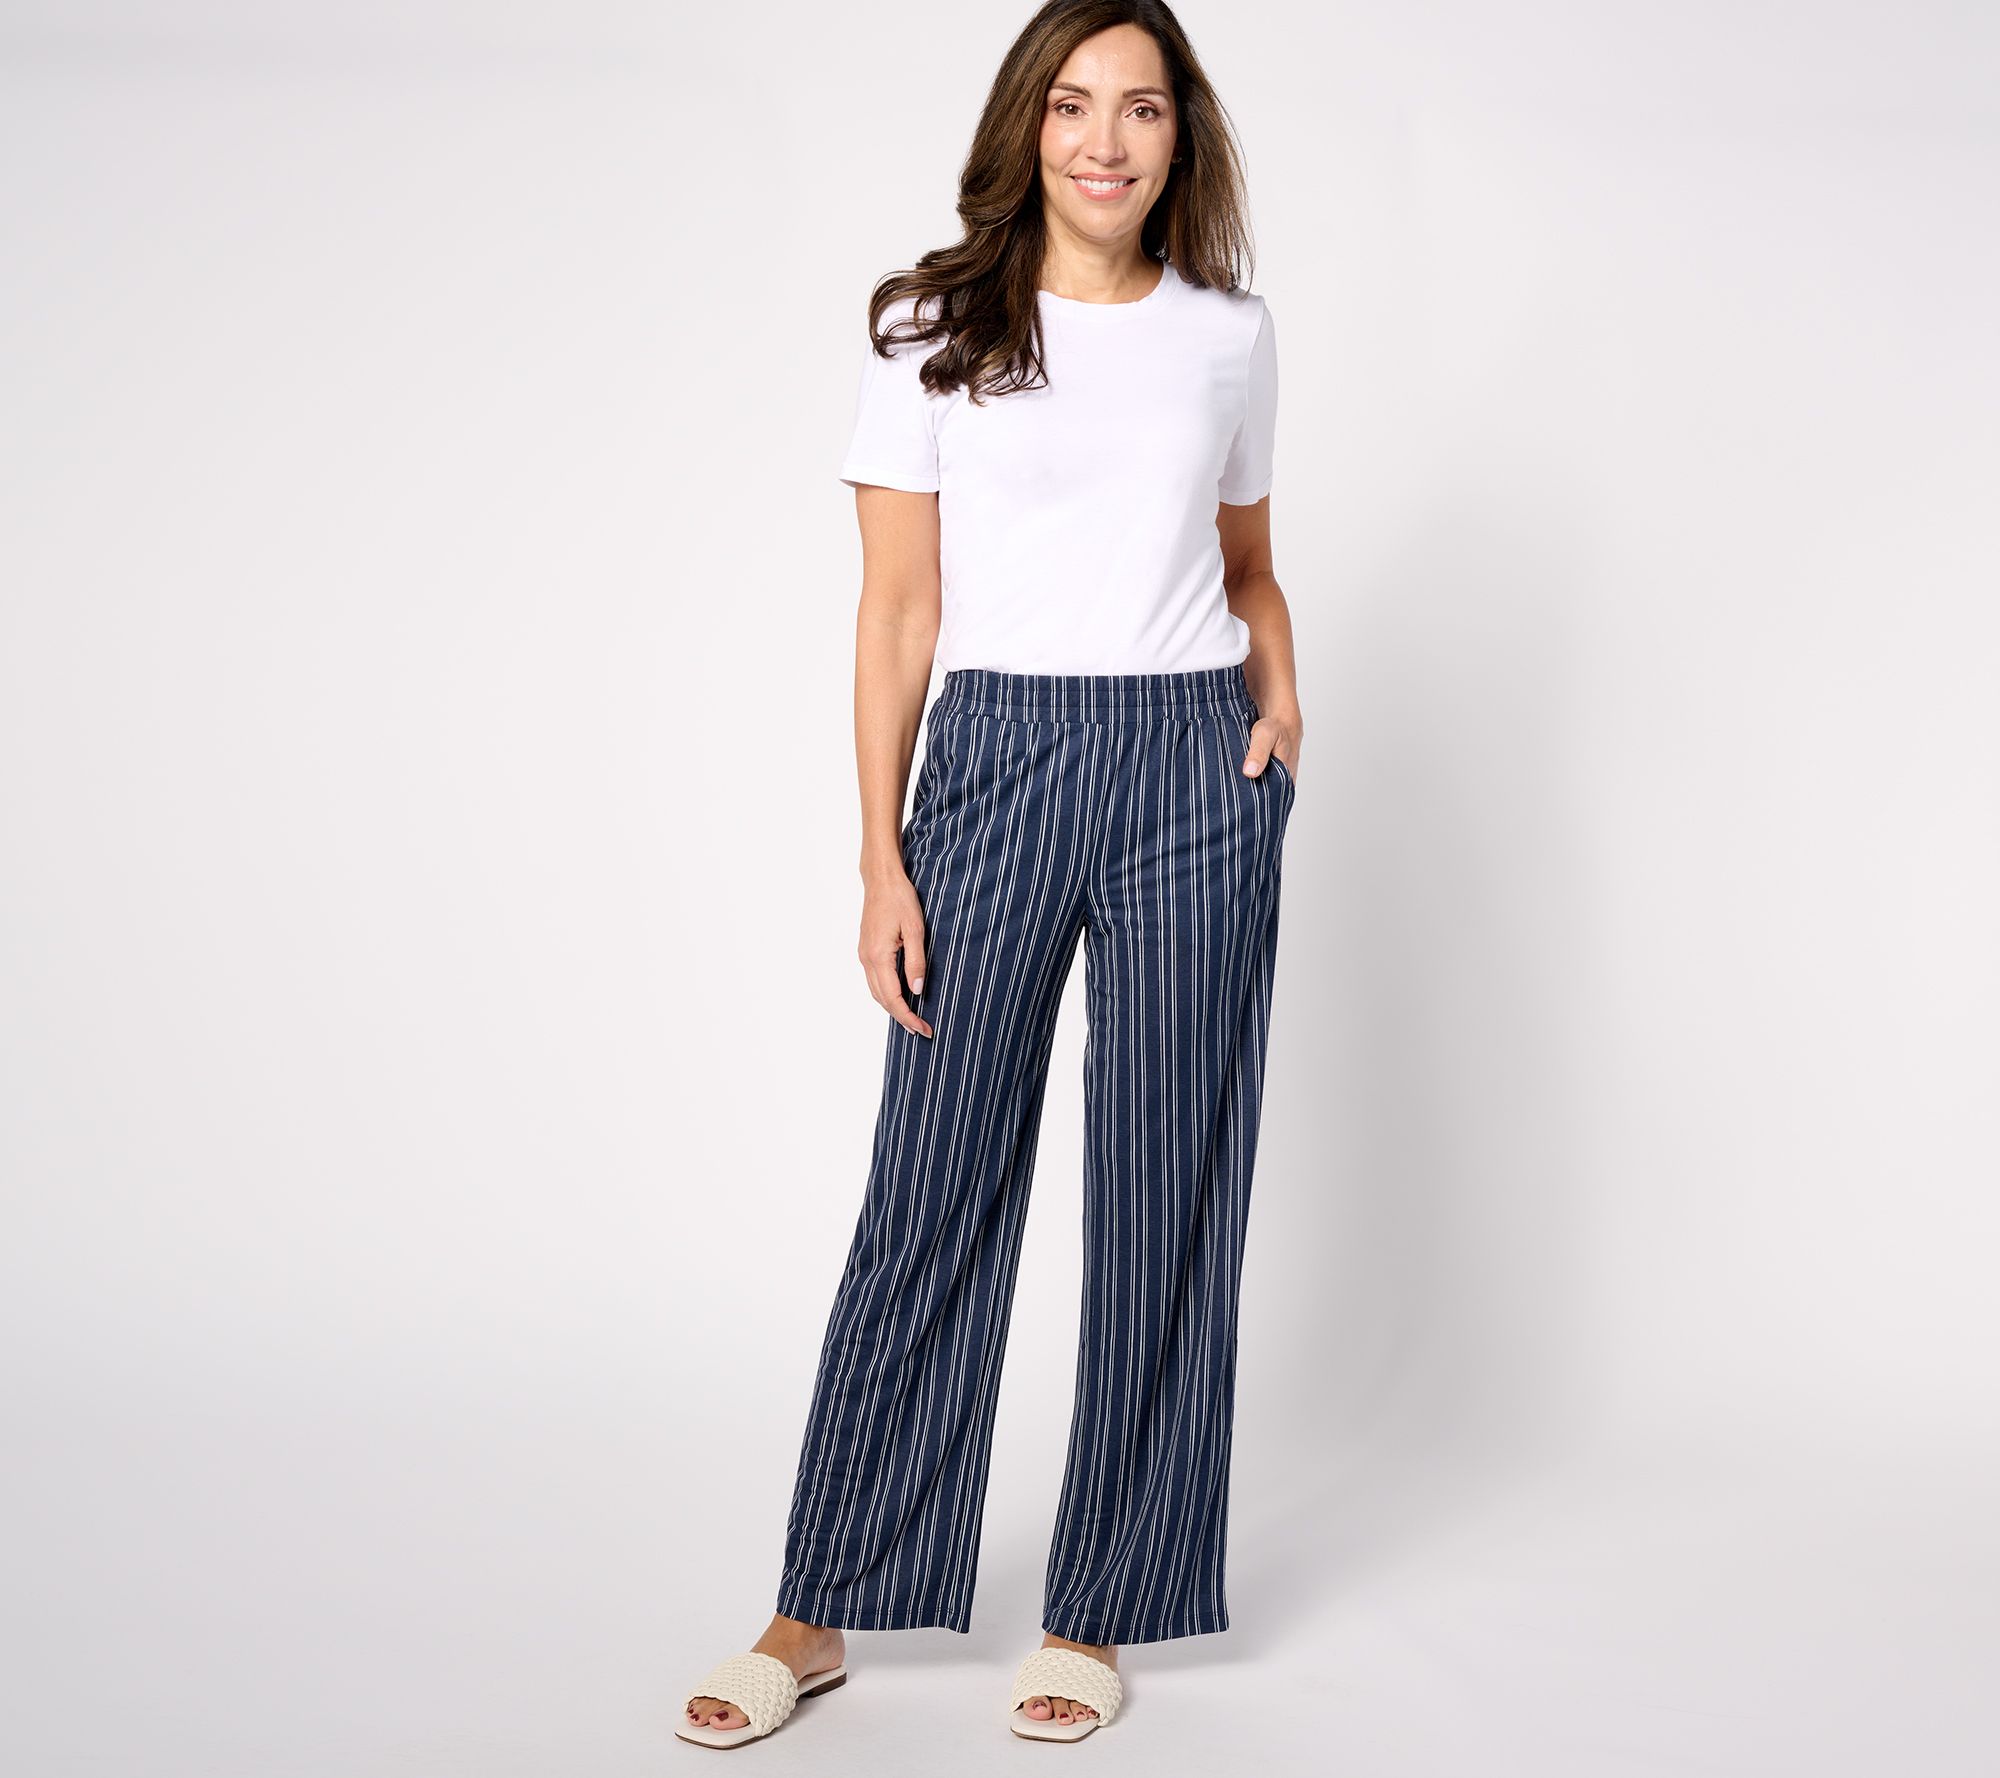 As Is Belle by Kim Gravel Ponte Knit Capri Pants with Side Vents 